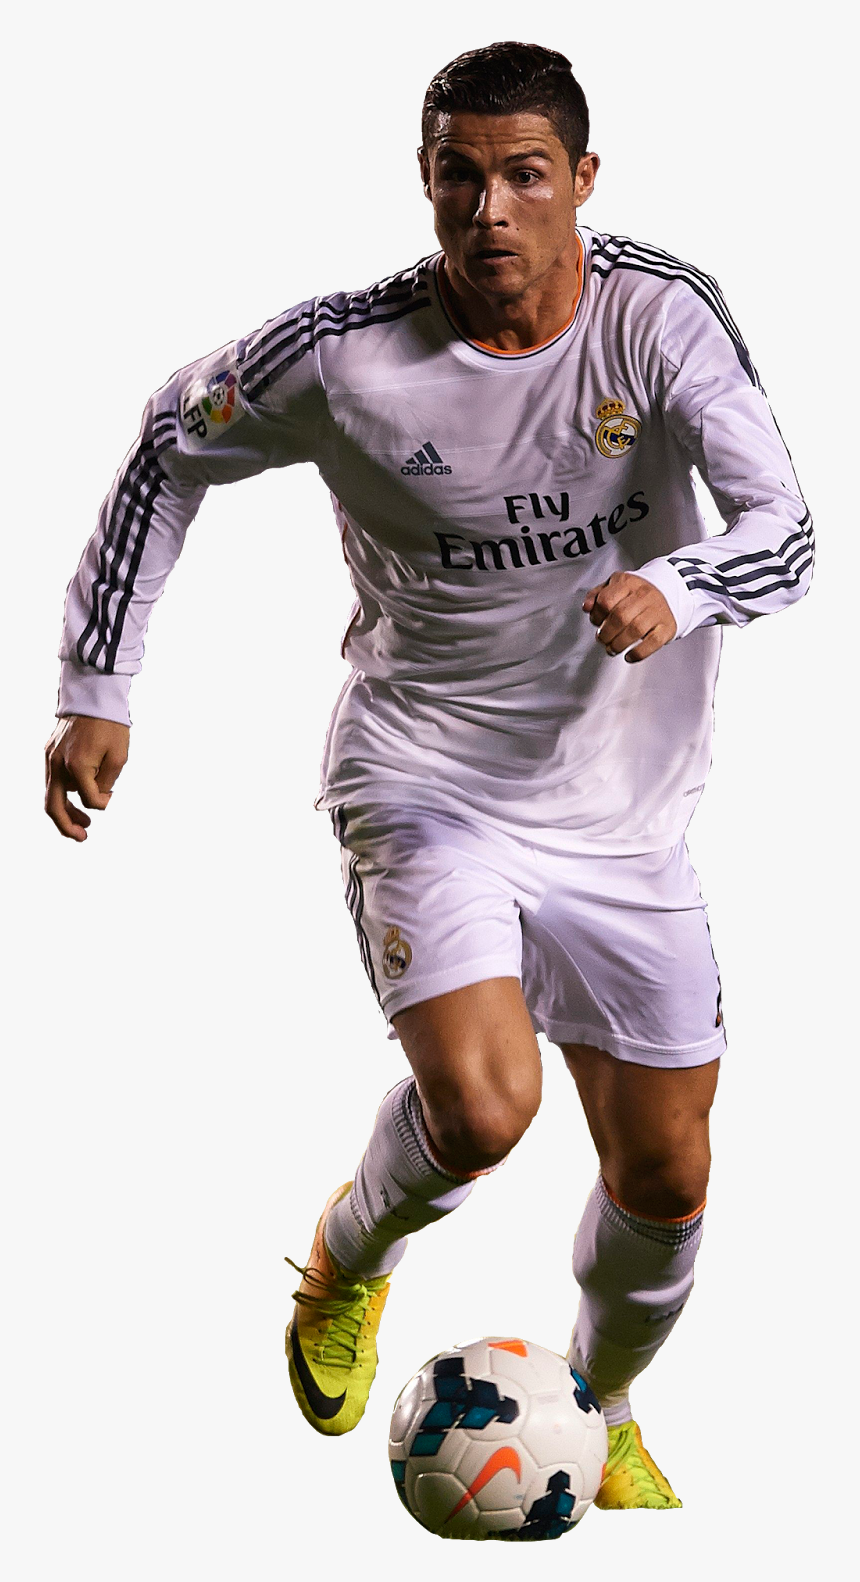 Real Fifa Cristiano Portugal Cup Madrid Ronaldo Clipart - Ronaldo Clipart, HD Png Download, Free Download